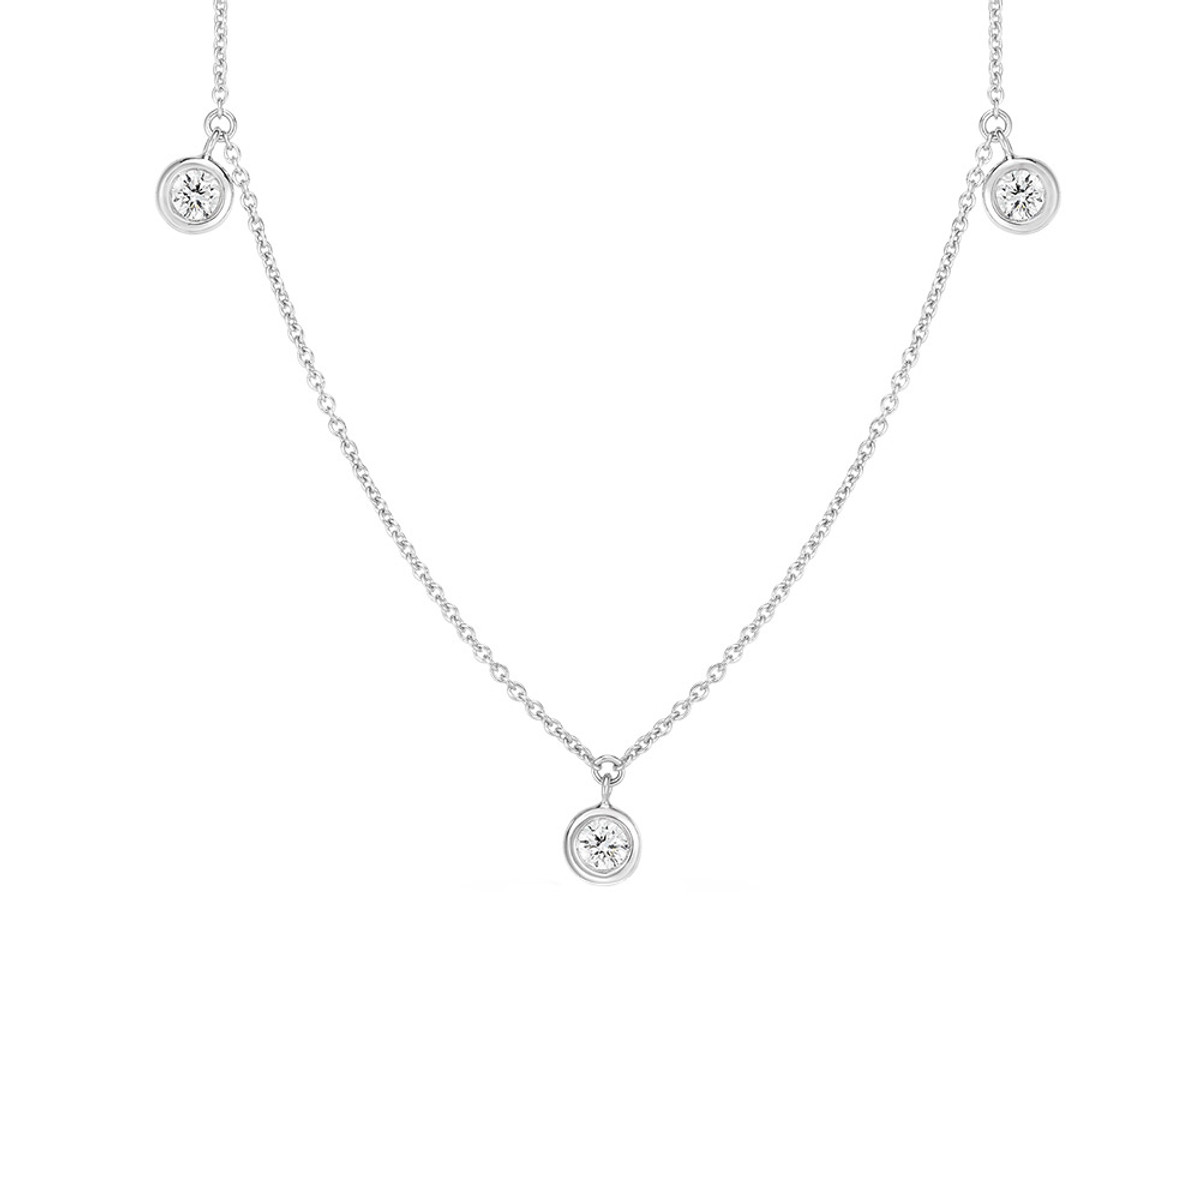 Roberto Coin 18K White Gold & Diamond 3 Station Dangle Necklace-DNKFY7668 Product Image